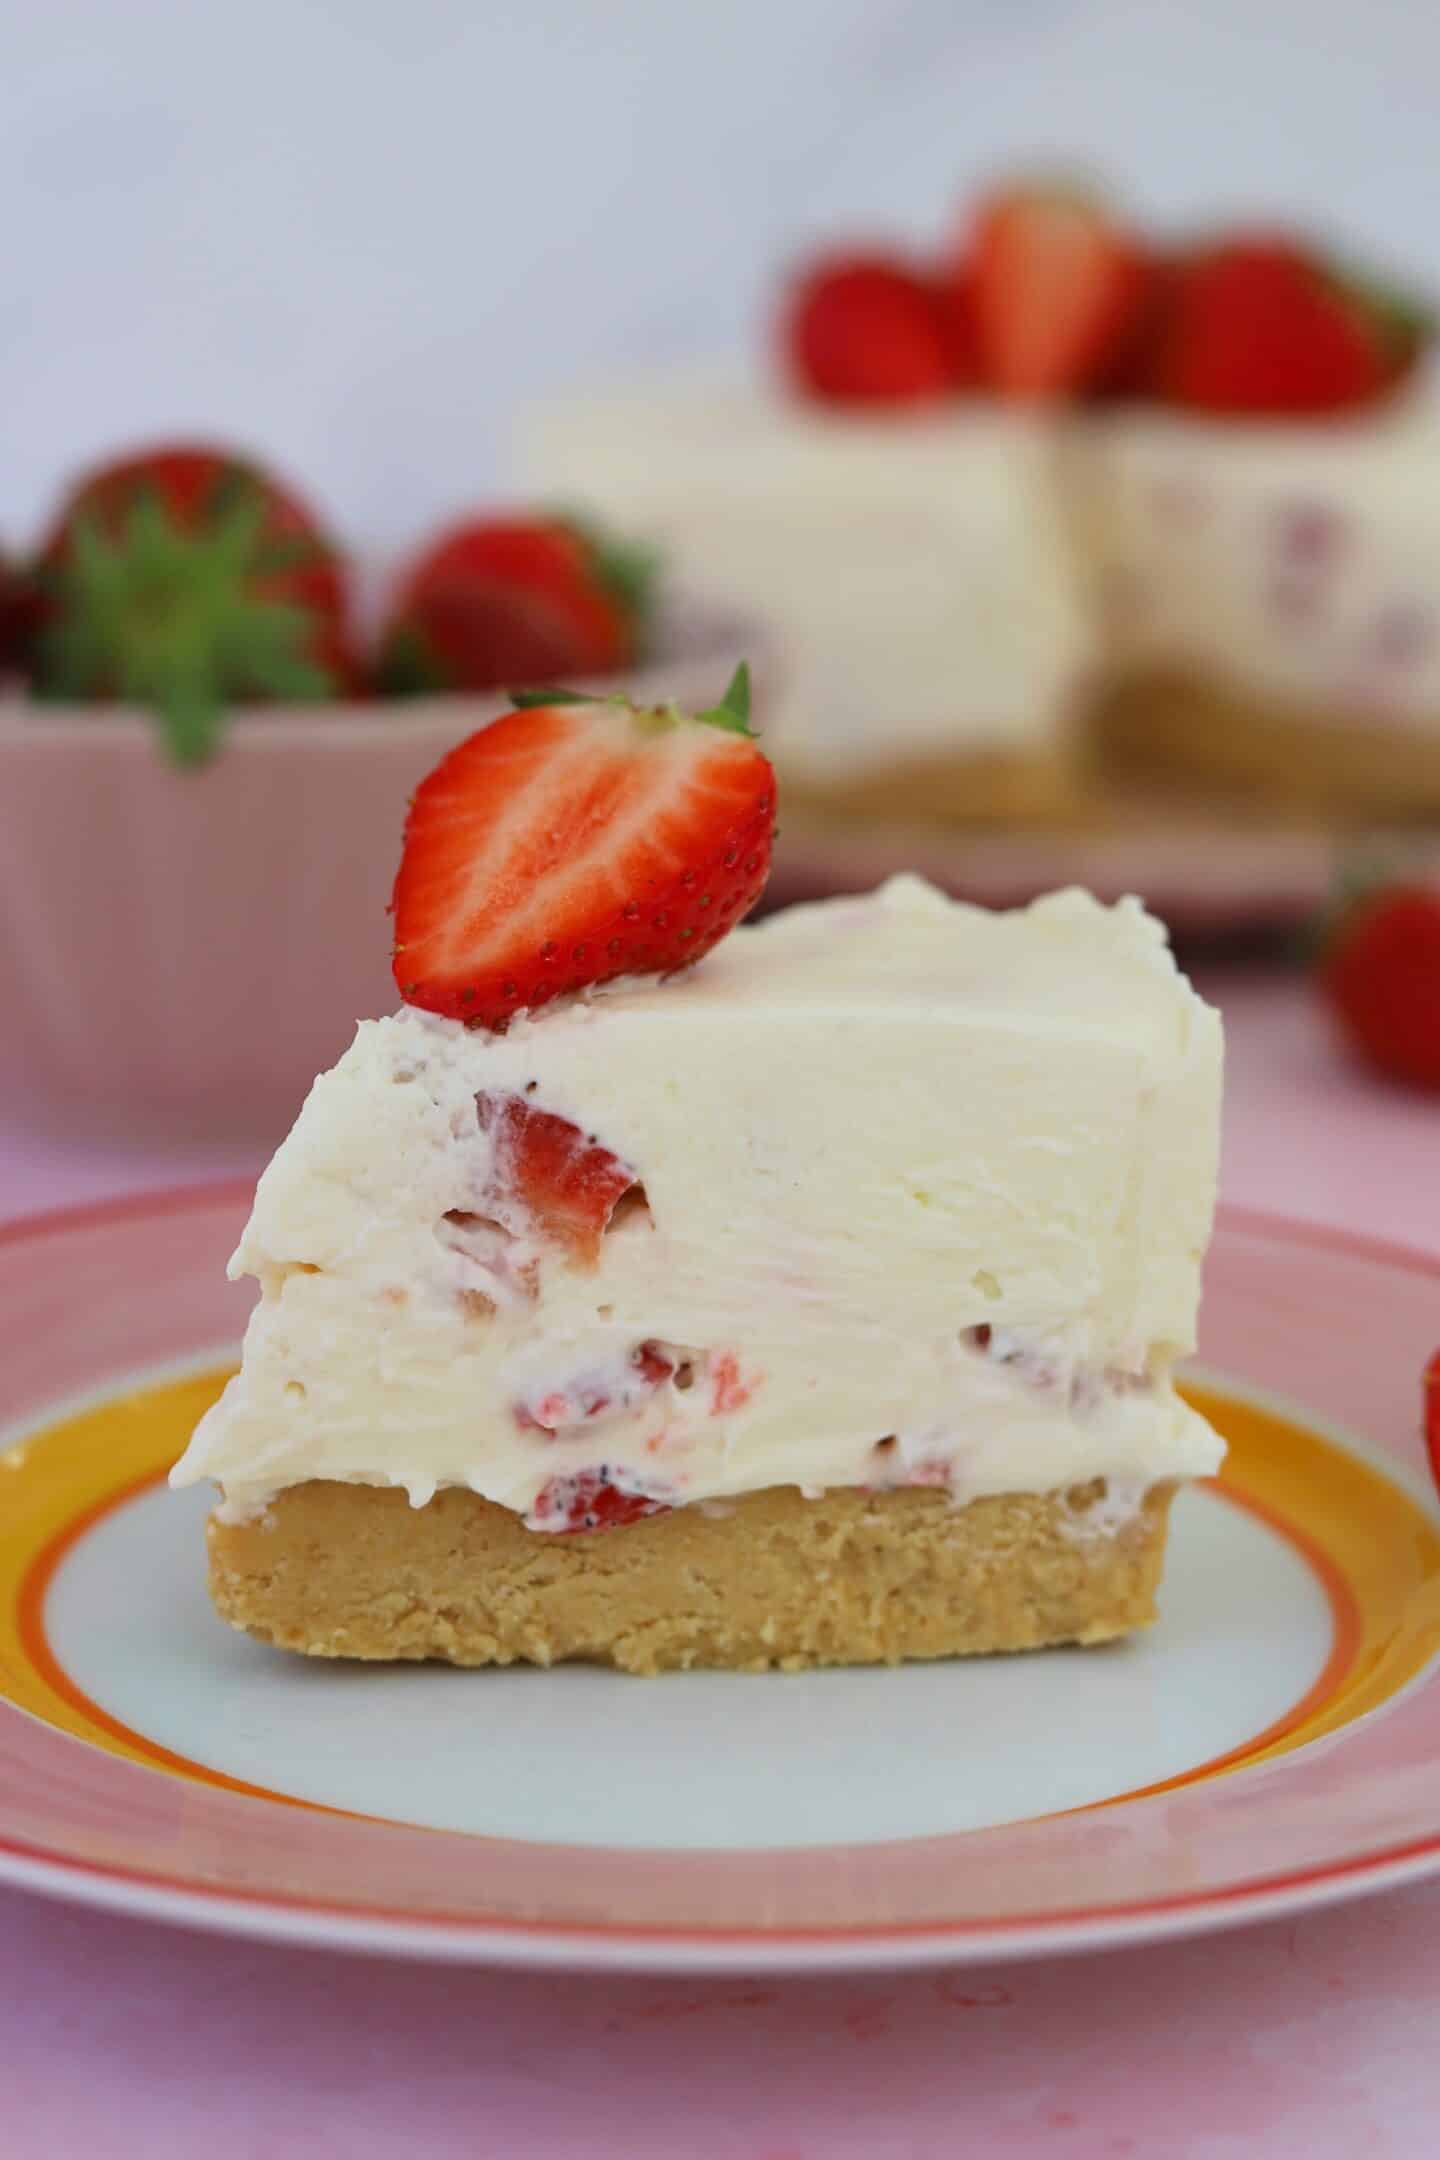 A slice of gluten free no bake strawberry cheesecake on a plate.